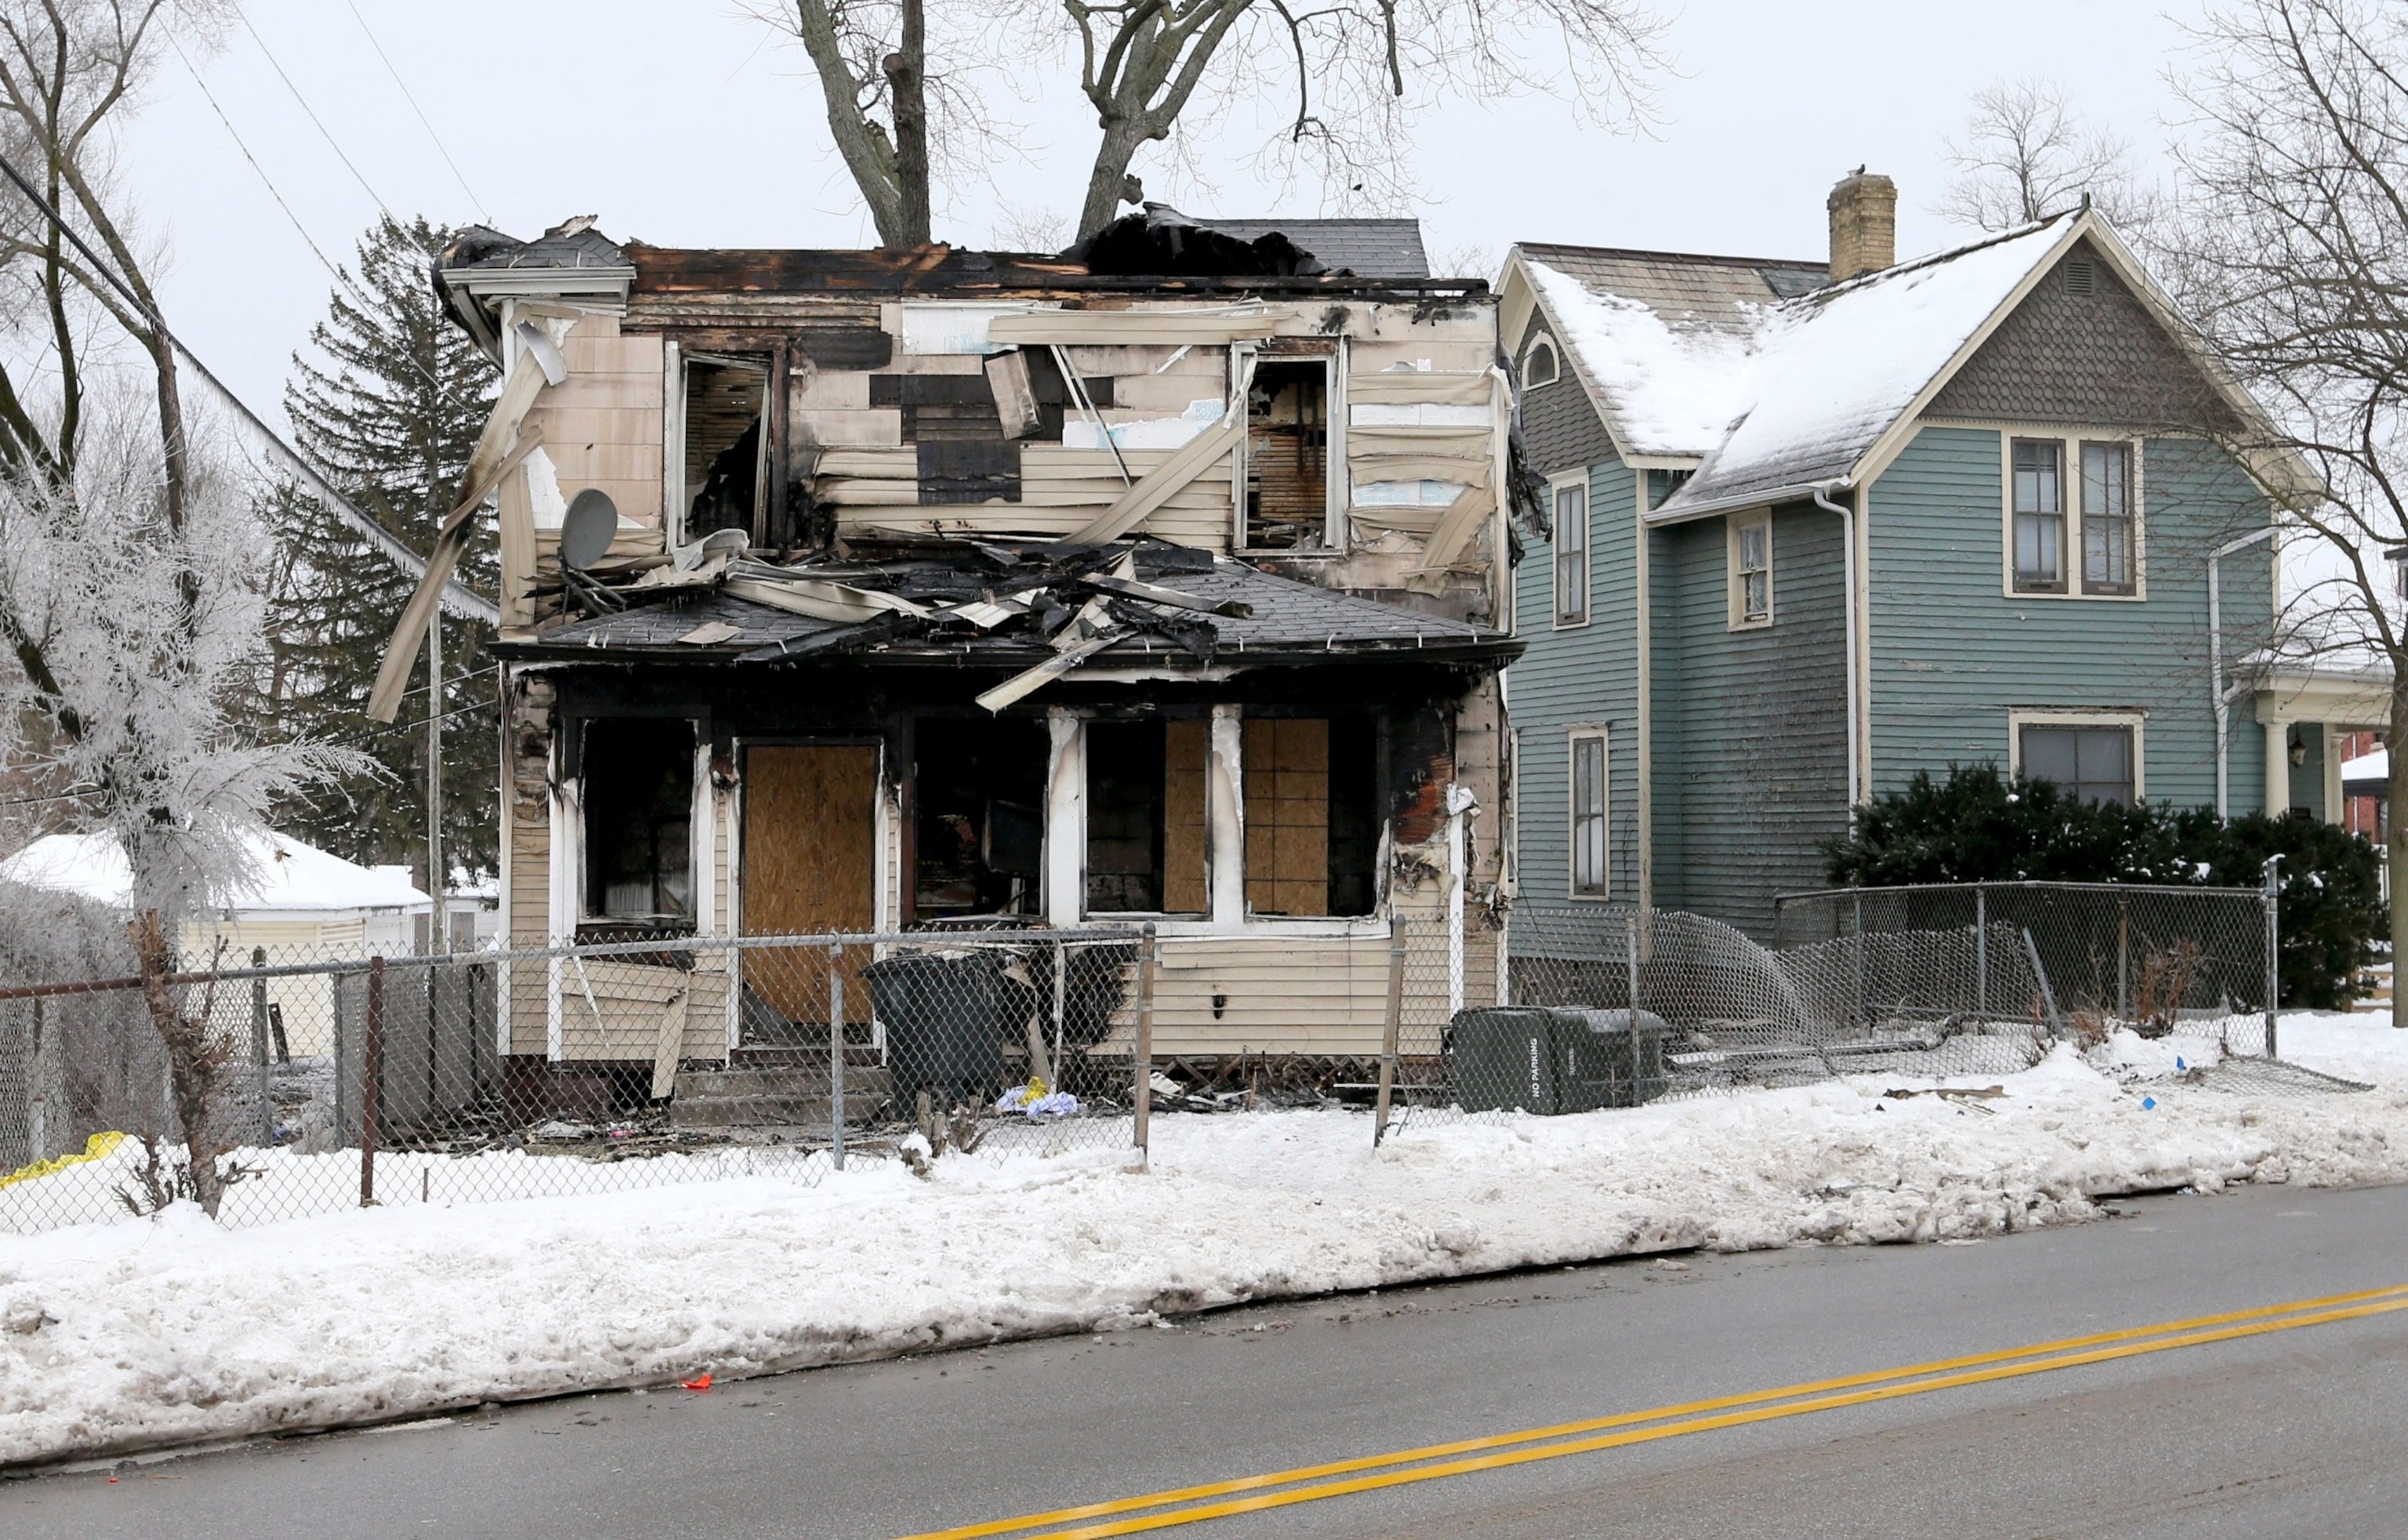 PHOTO: The burned-out shell of a two-story house where five children died in a blaze, South Bend, IN, Jan. 22, 2024.